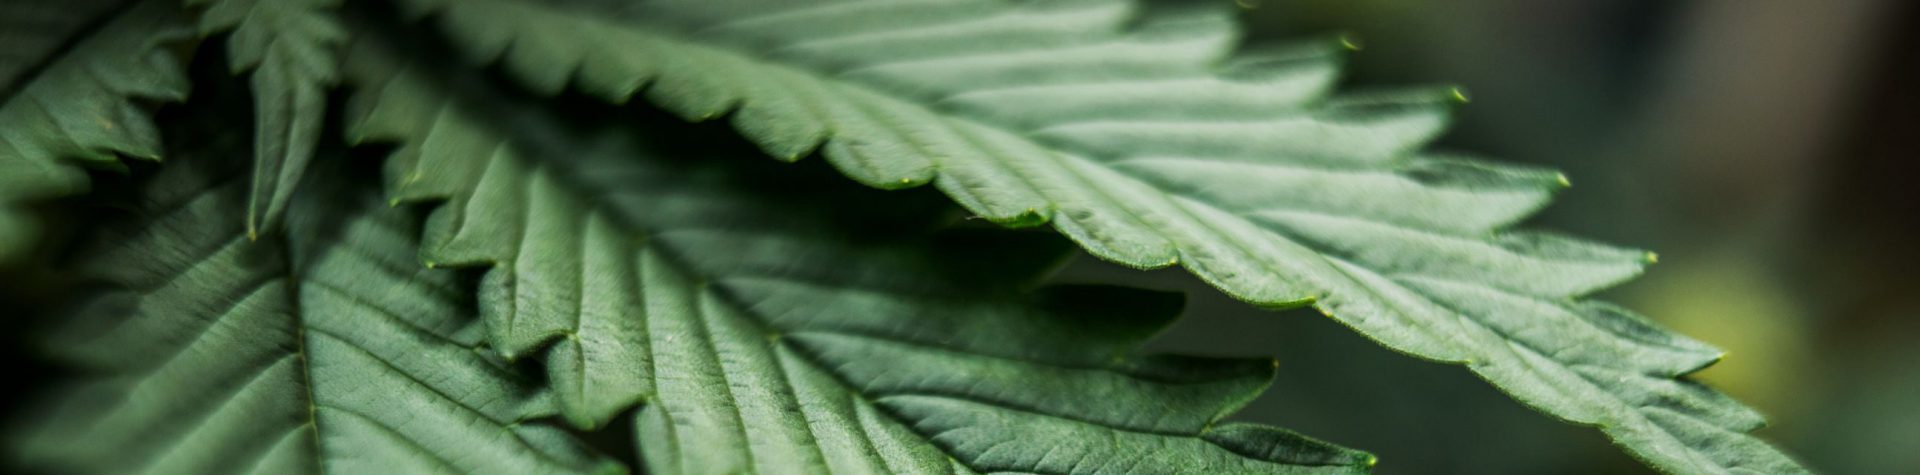 banner image of cannabis leaves